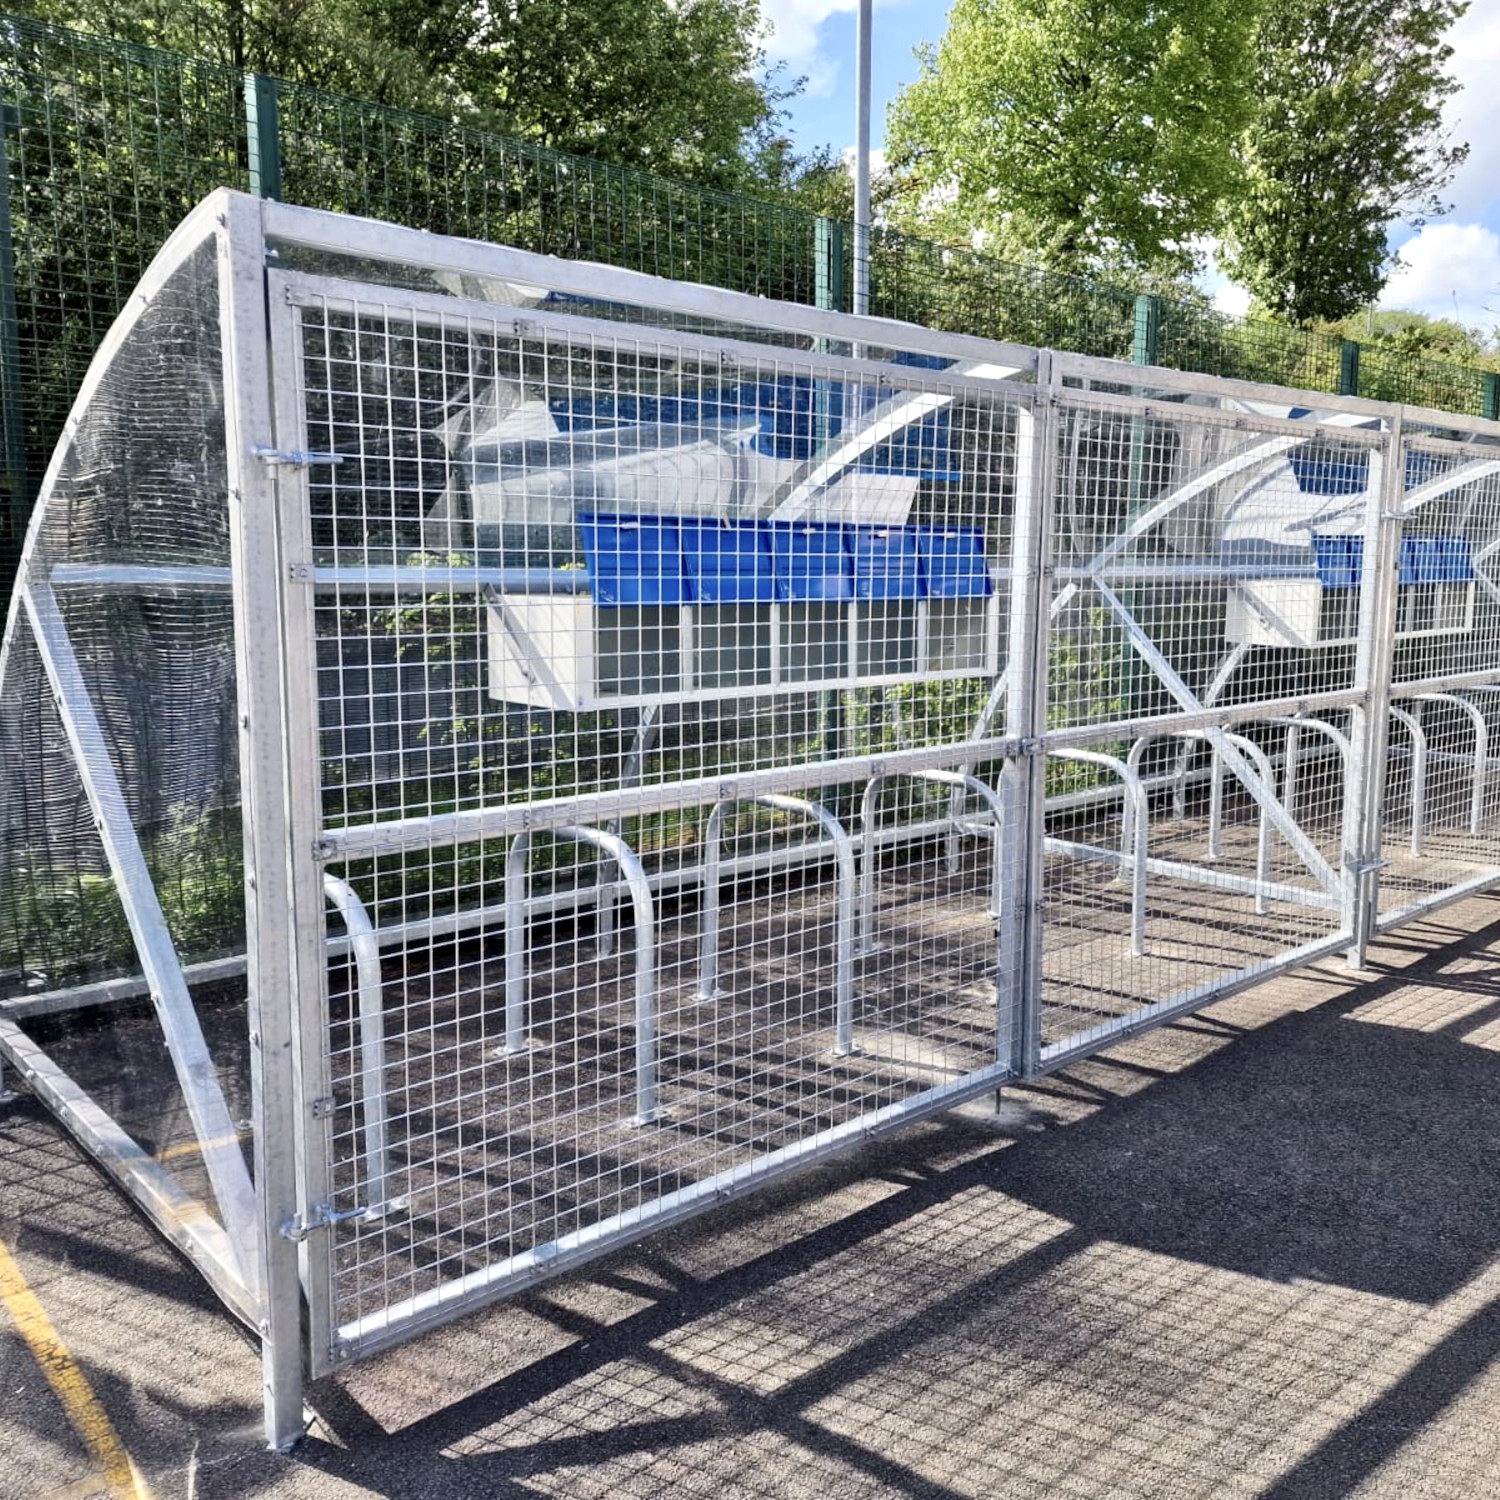 20 space original cycle shelter with grated security partitioning